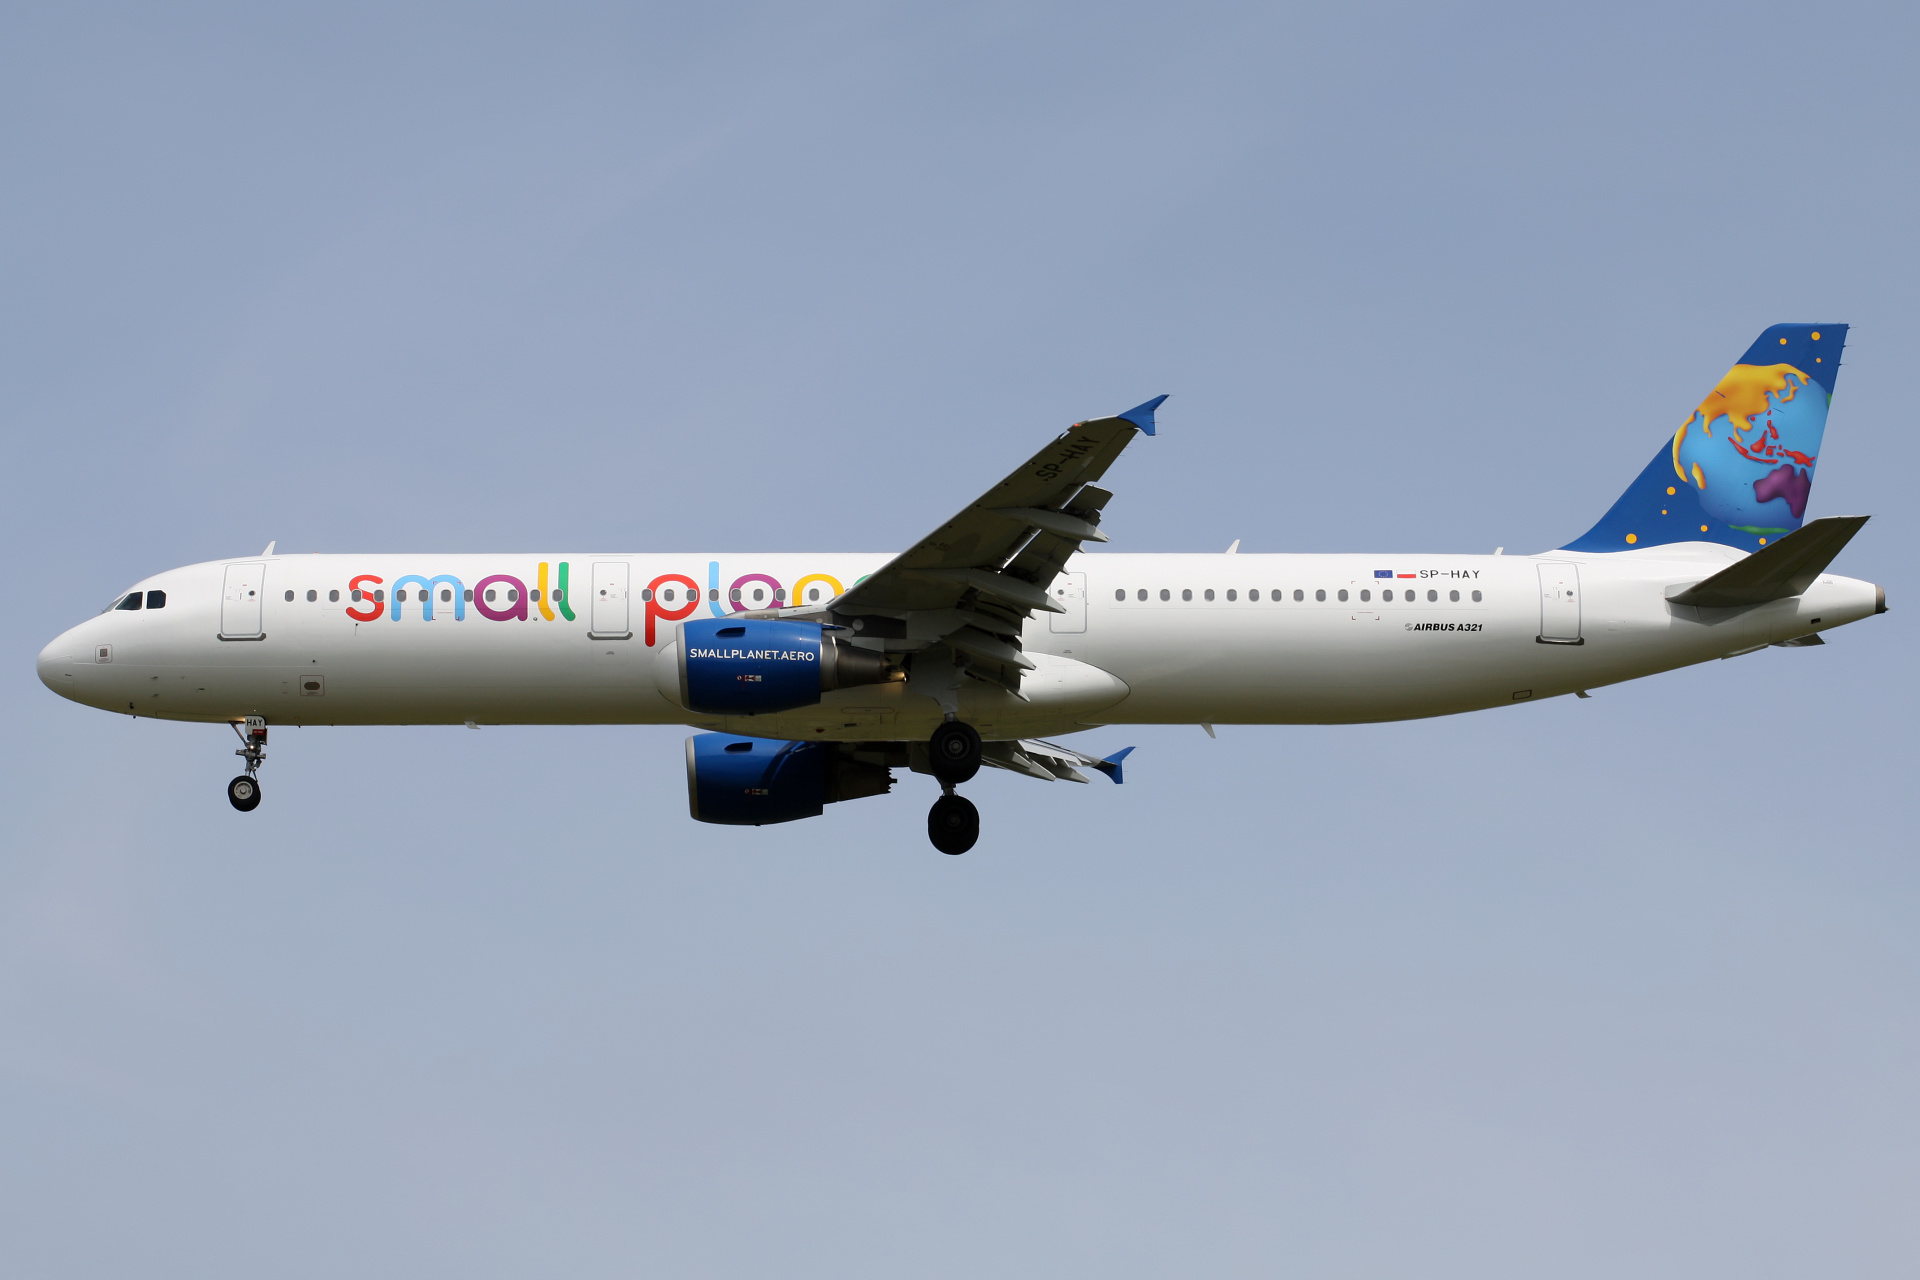 SP-HAY (Aircraft » EPWA Spotting » Airbus A321-200 » Small Planet Airlines Polska)